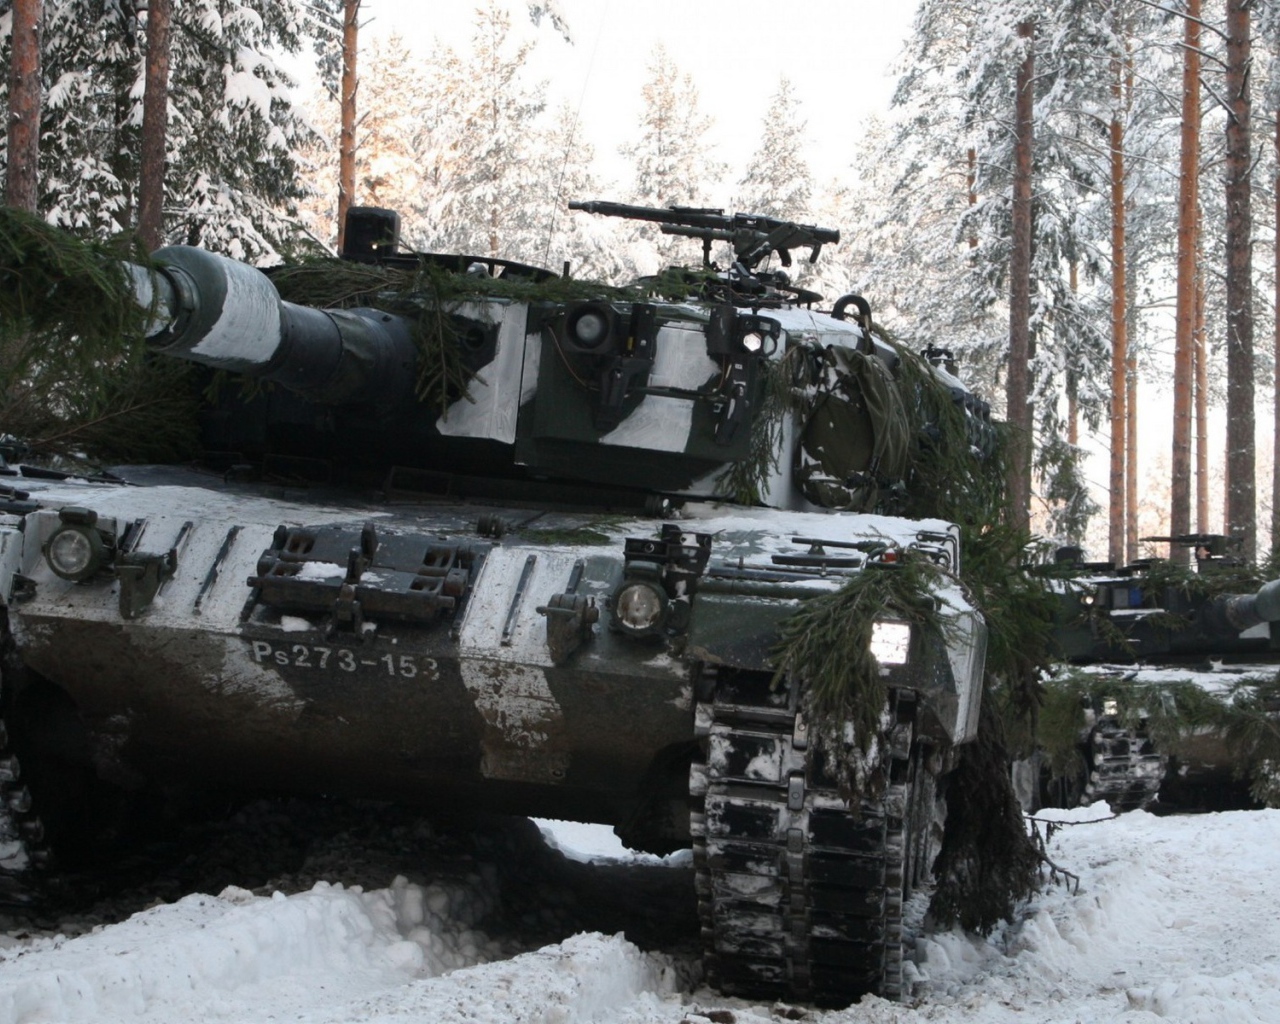 Tank in disguise in the forest